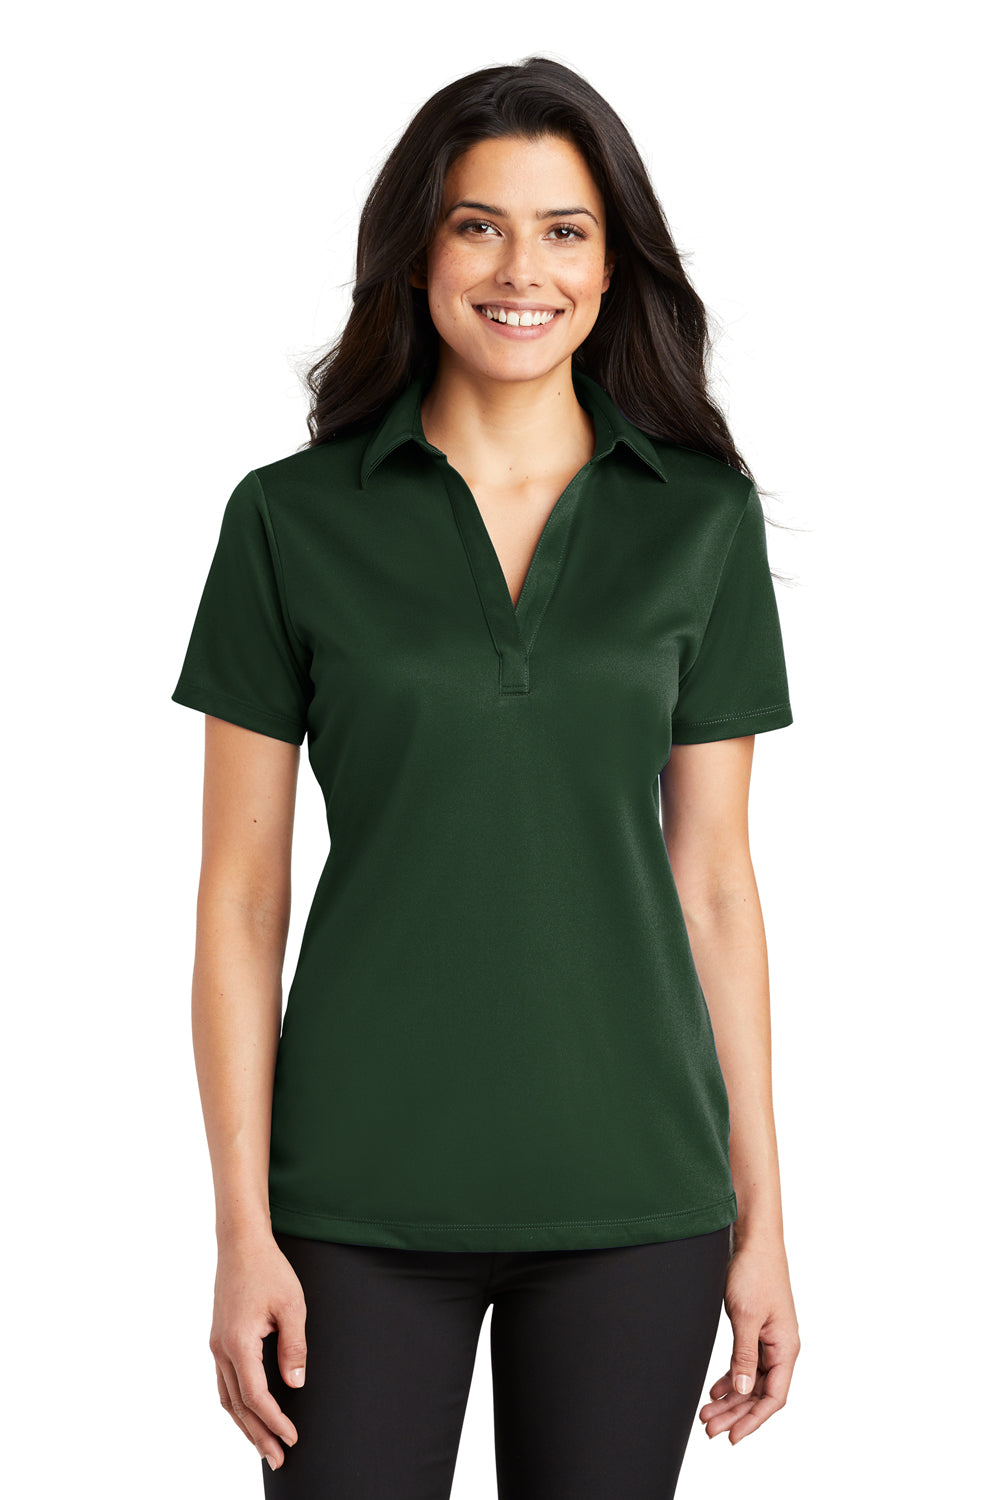 Port Authority L540 Womens Silk Touch Performance Moisture Wicking Short Sleeve Polo Shirt Forest Green Front